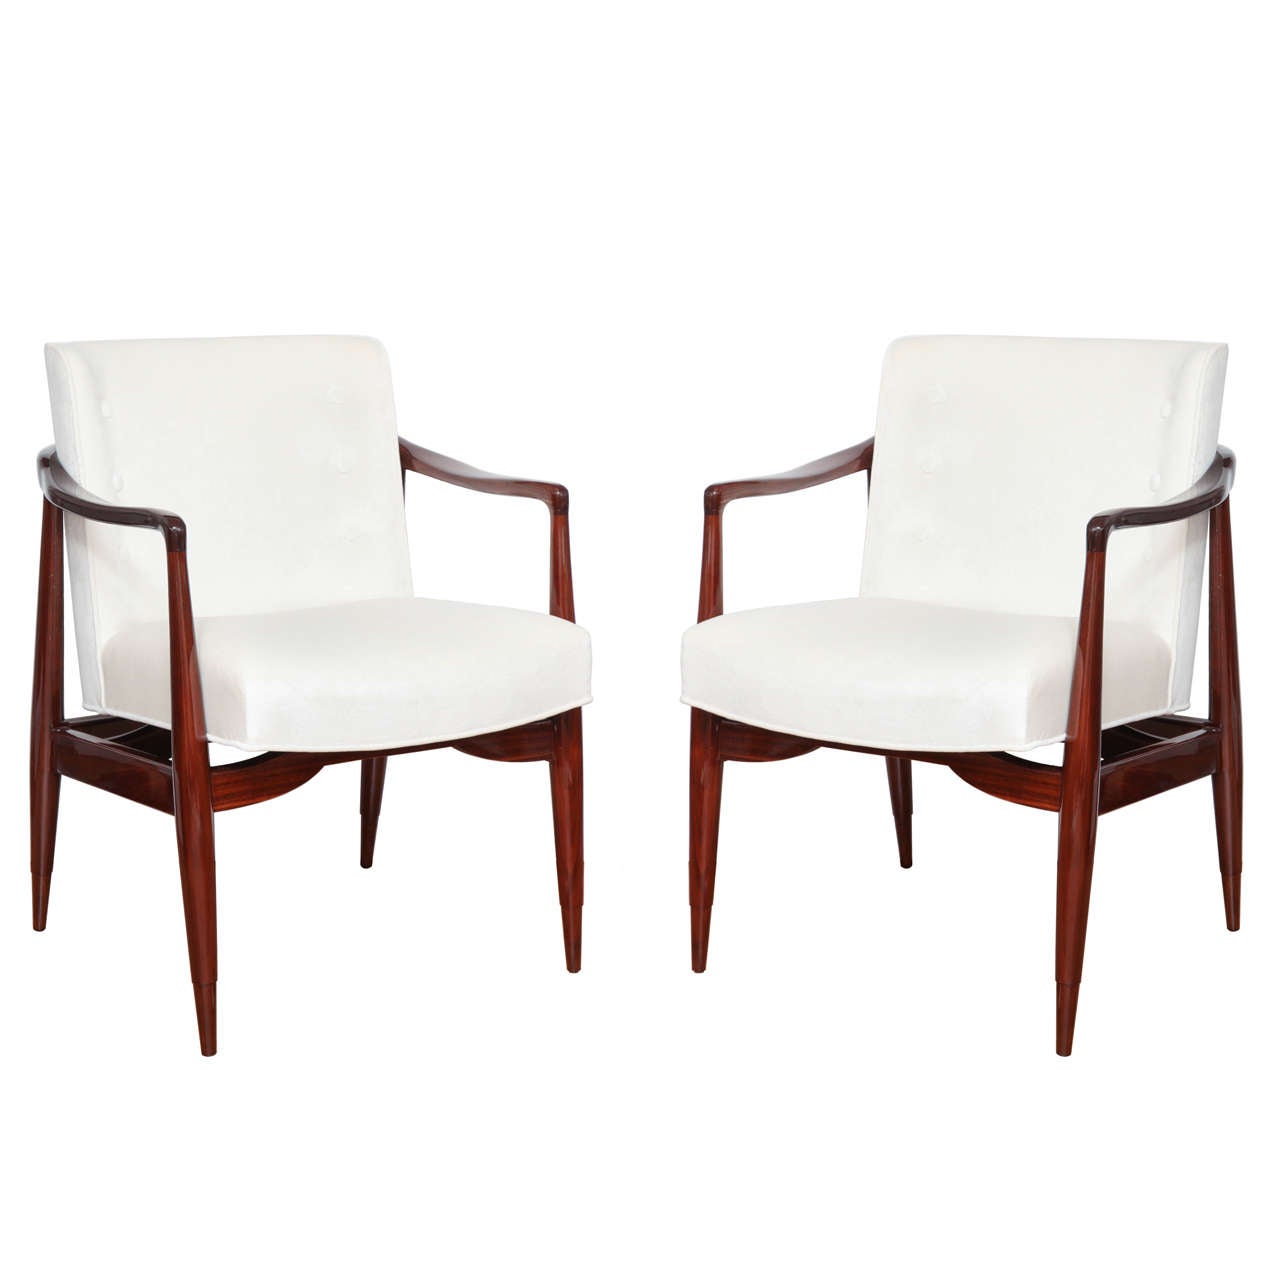 Sculptural American Midcentury Chairs